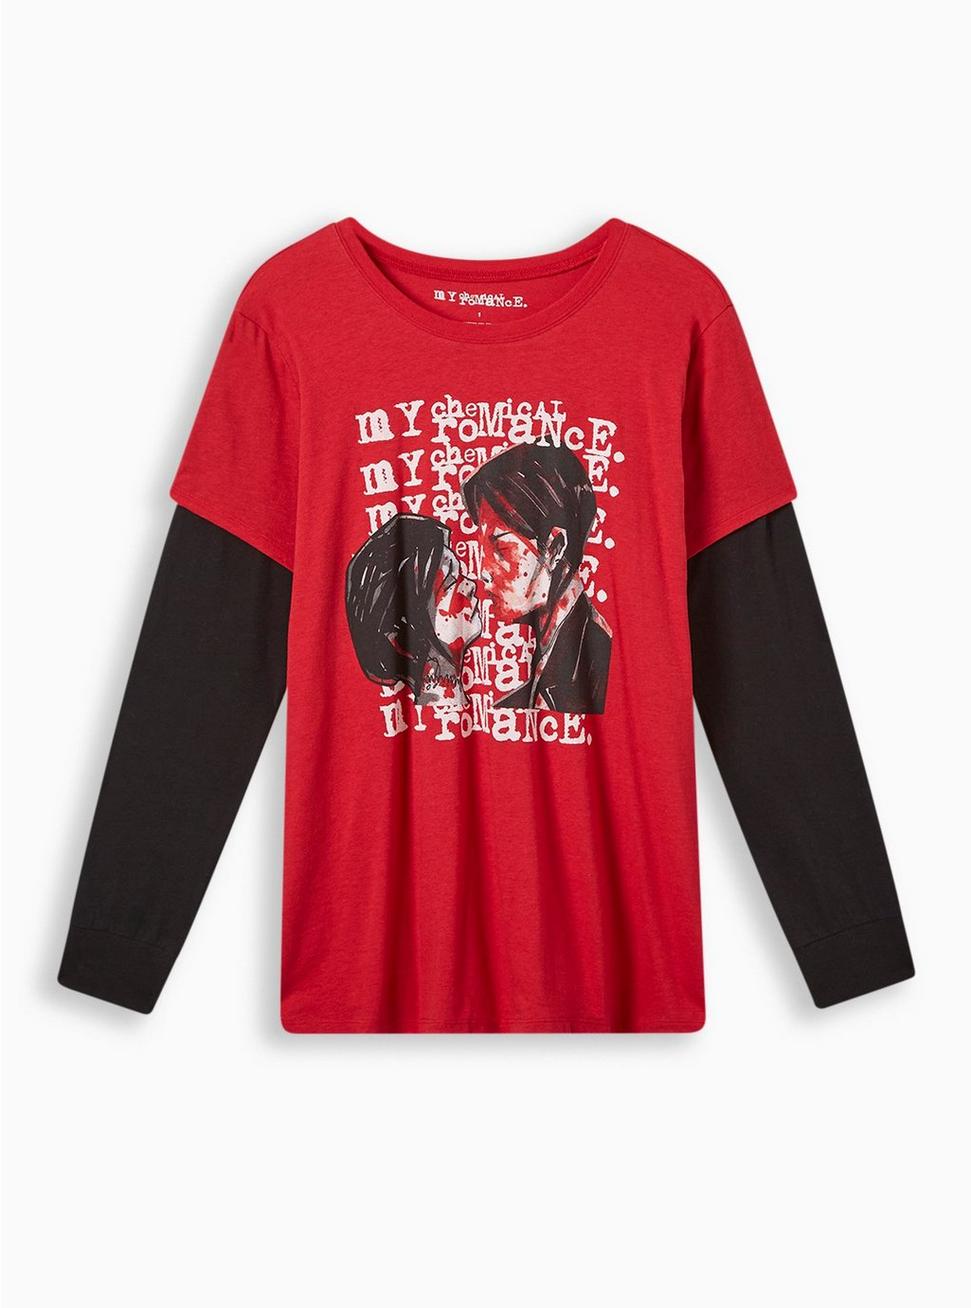 My Chemical Romance Classic Fit Cotton Crew Neck 2Fer Long Sleeve Tee, RED, hi-res